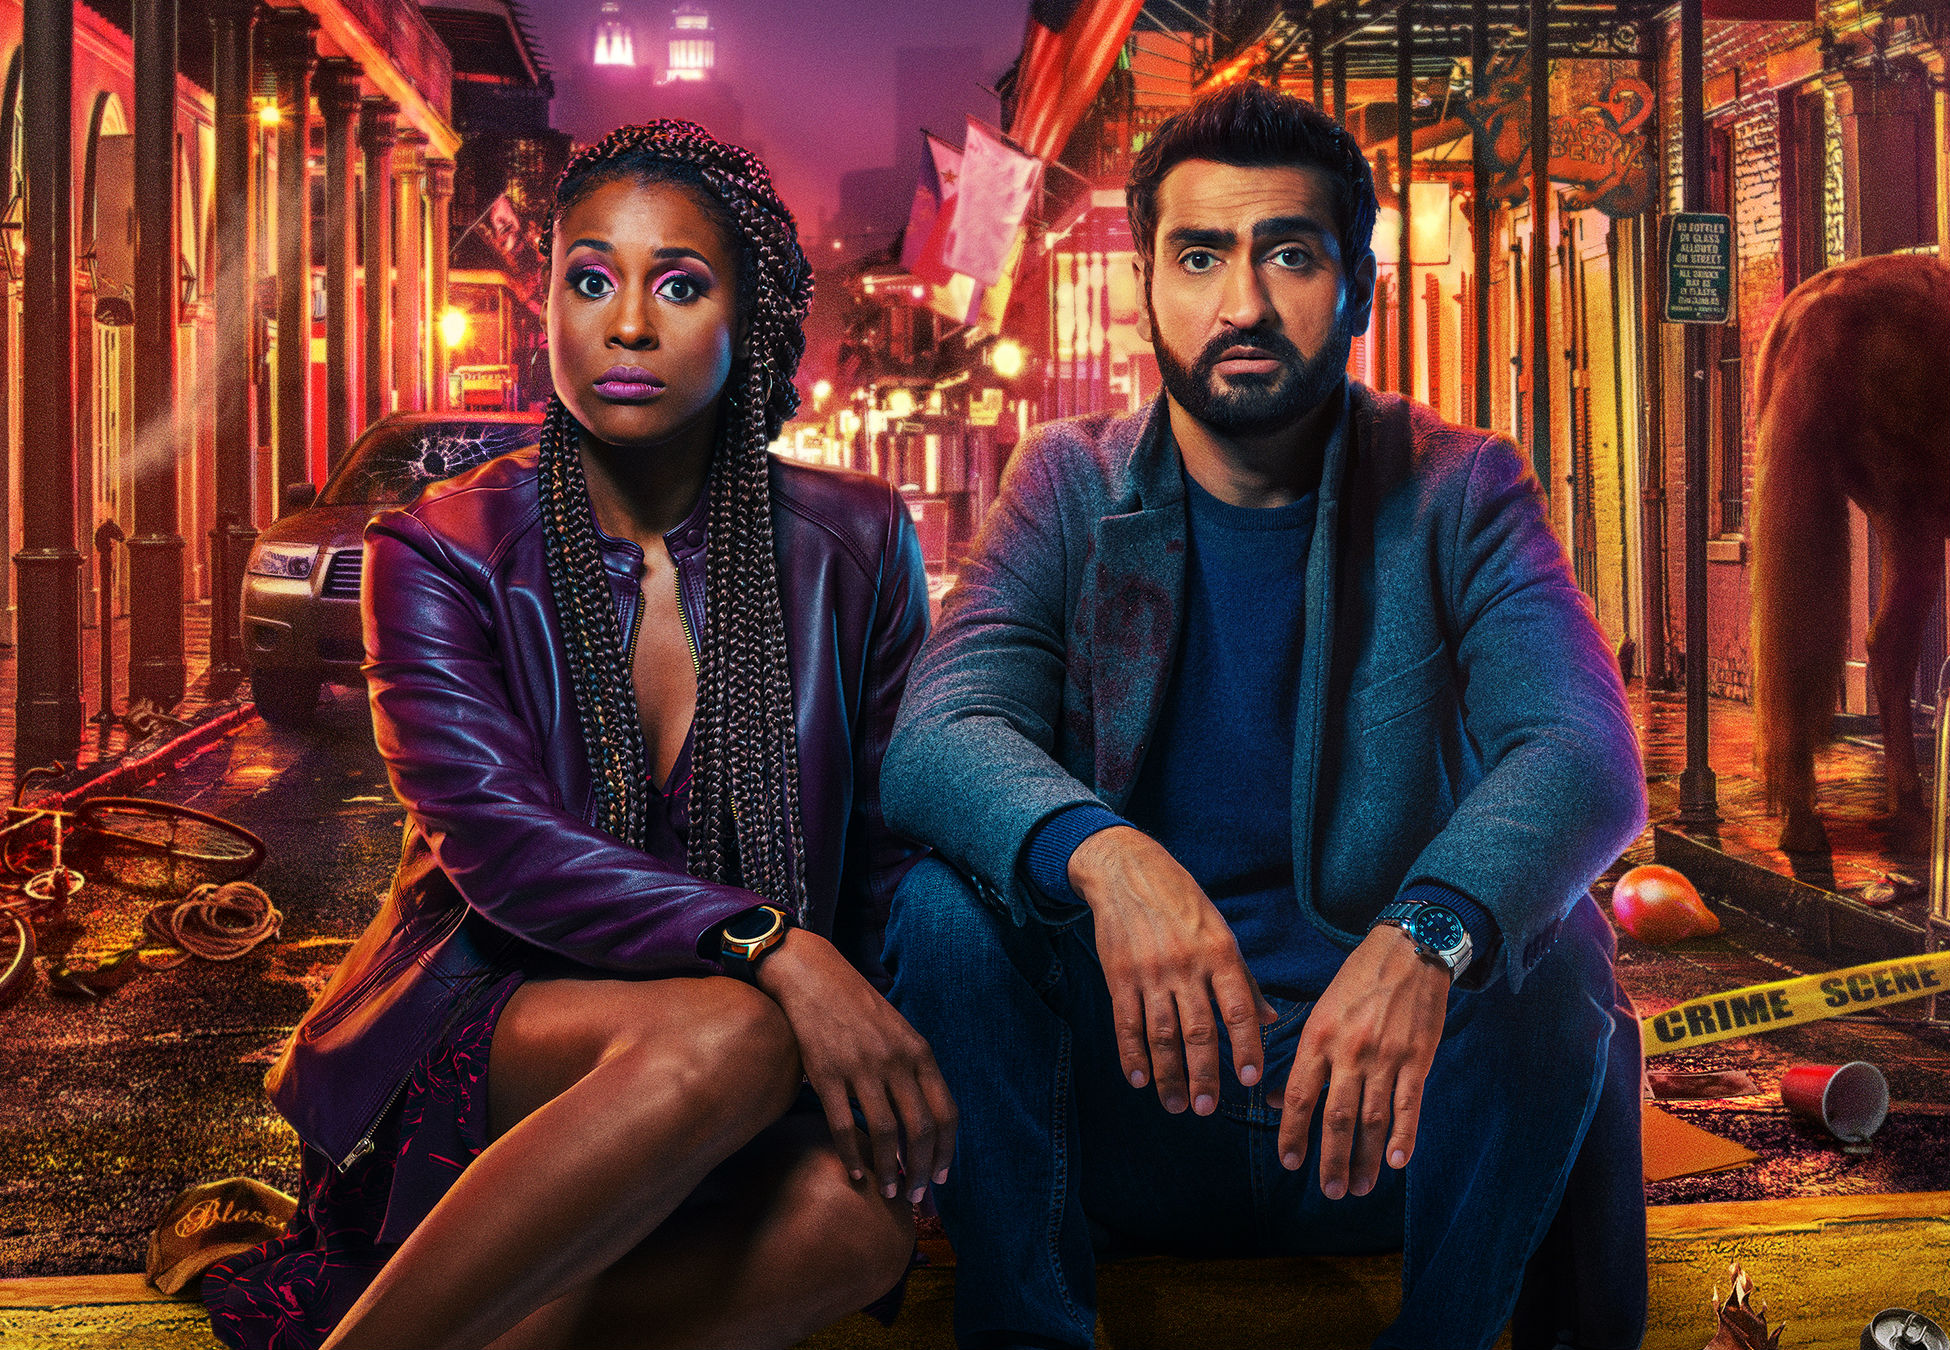 The Lovebirds Trailer: Kumail Nanjiani And Issa Rae Are On The Run After A Murder